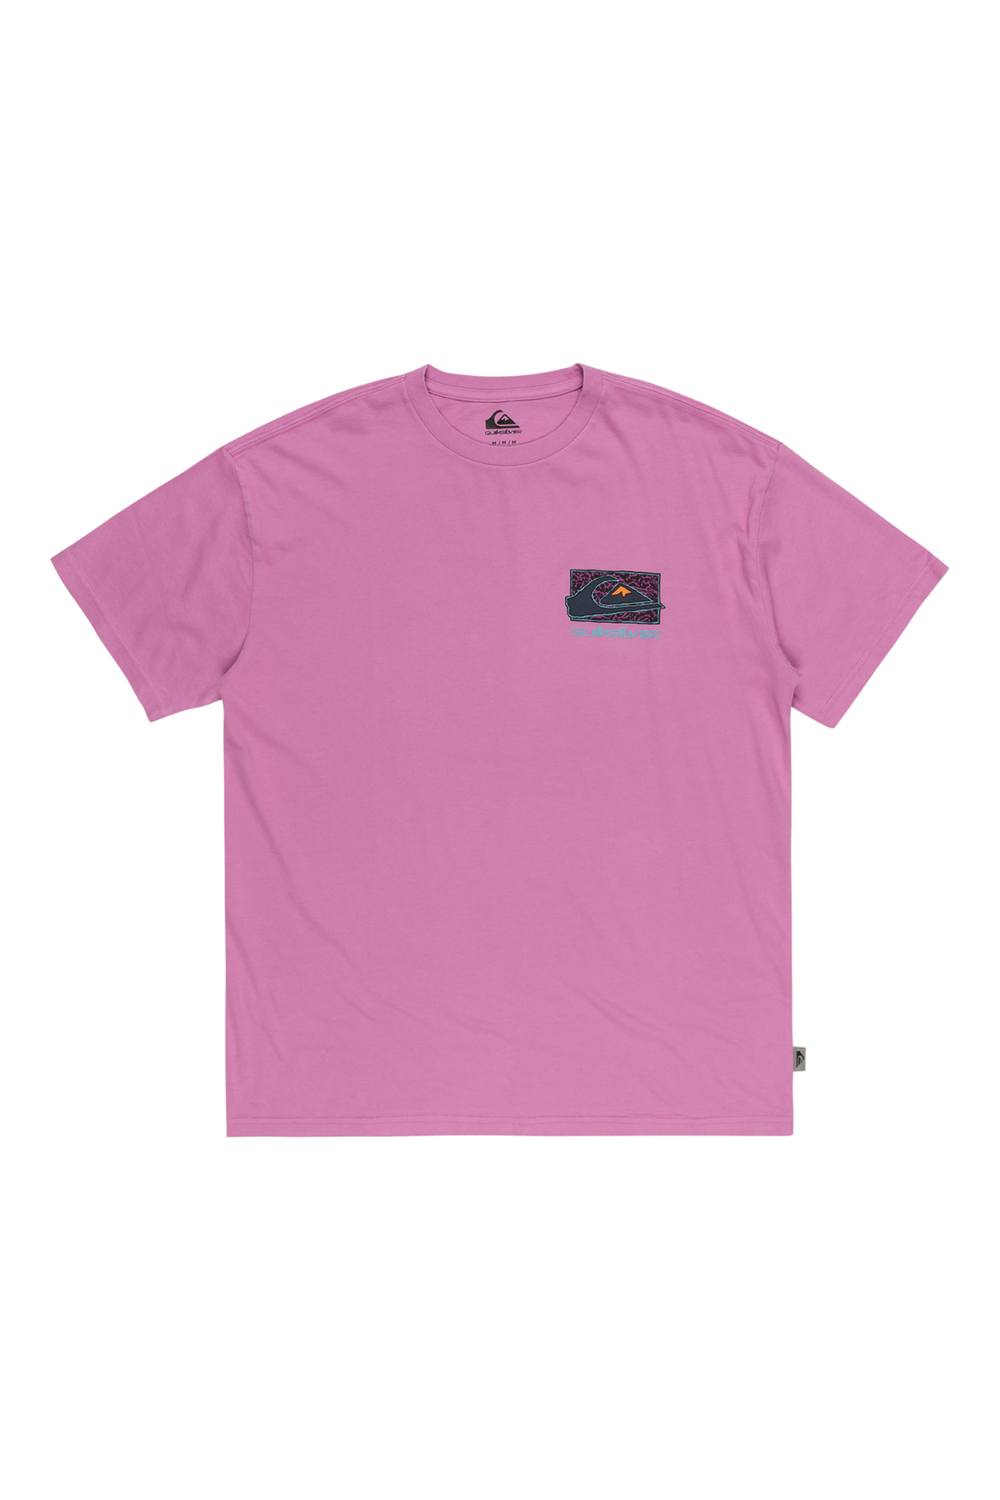 Quiksilver Spin Cycle Short Sleeve T-Shirt Violet